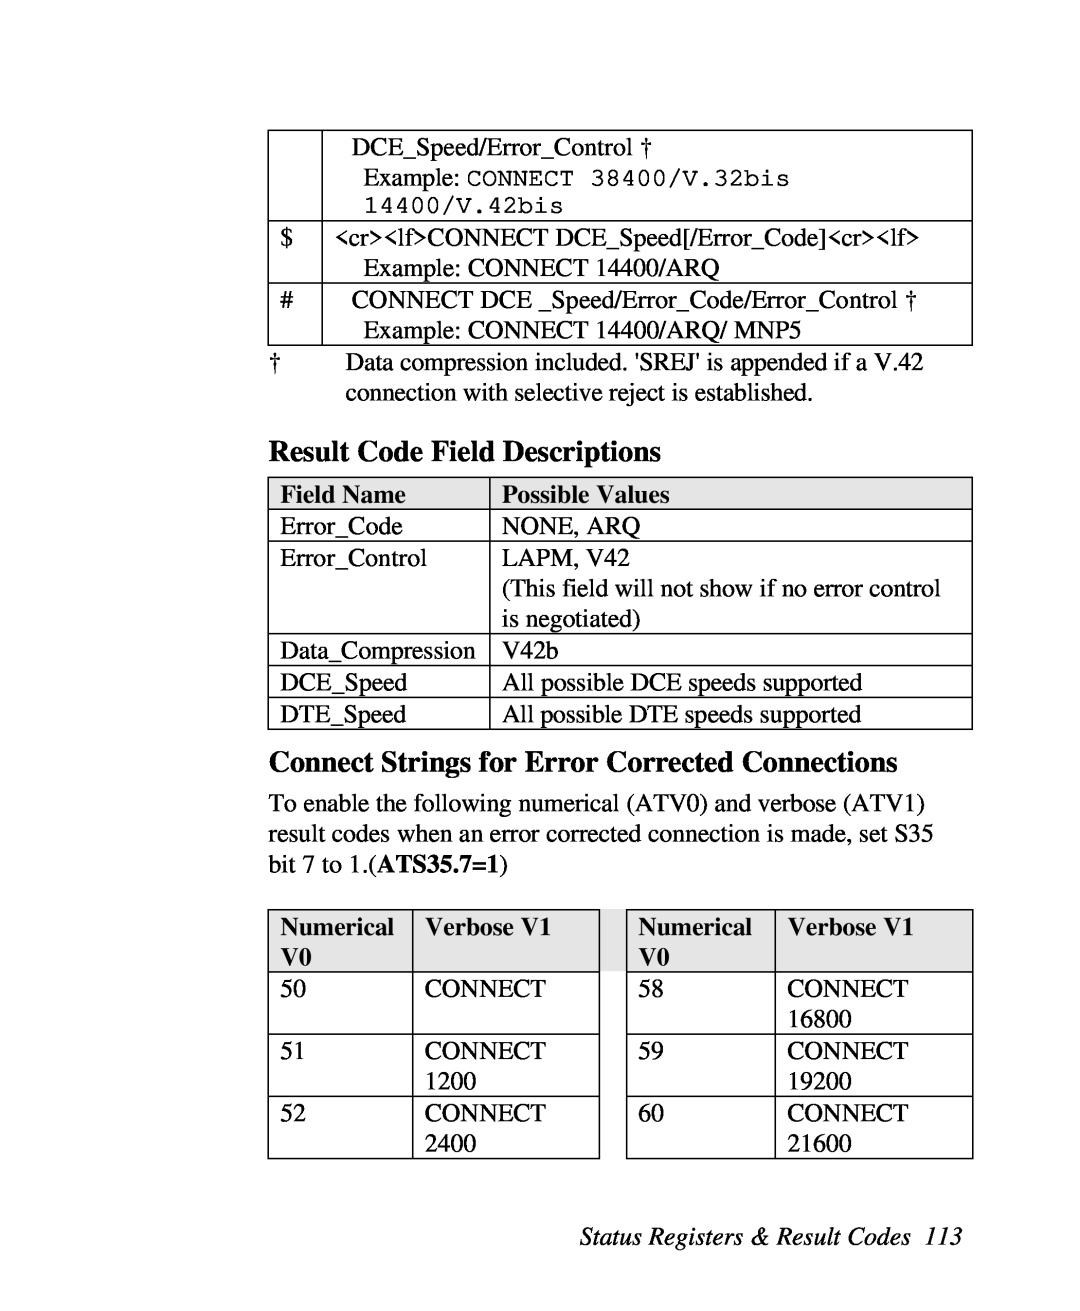 ZyXEL Communications U-336R/RE manual Result Code Field Descriptions, Connect Strings for Error Corrected Connections 